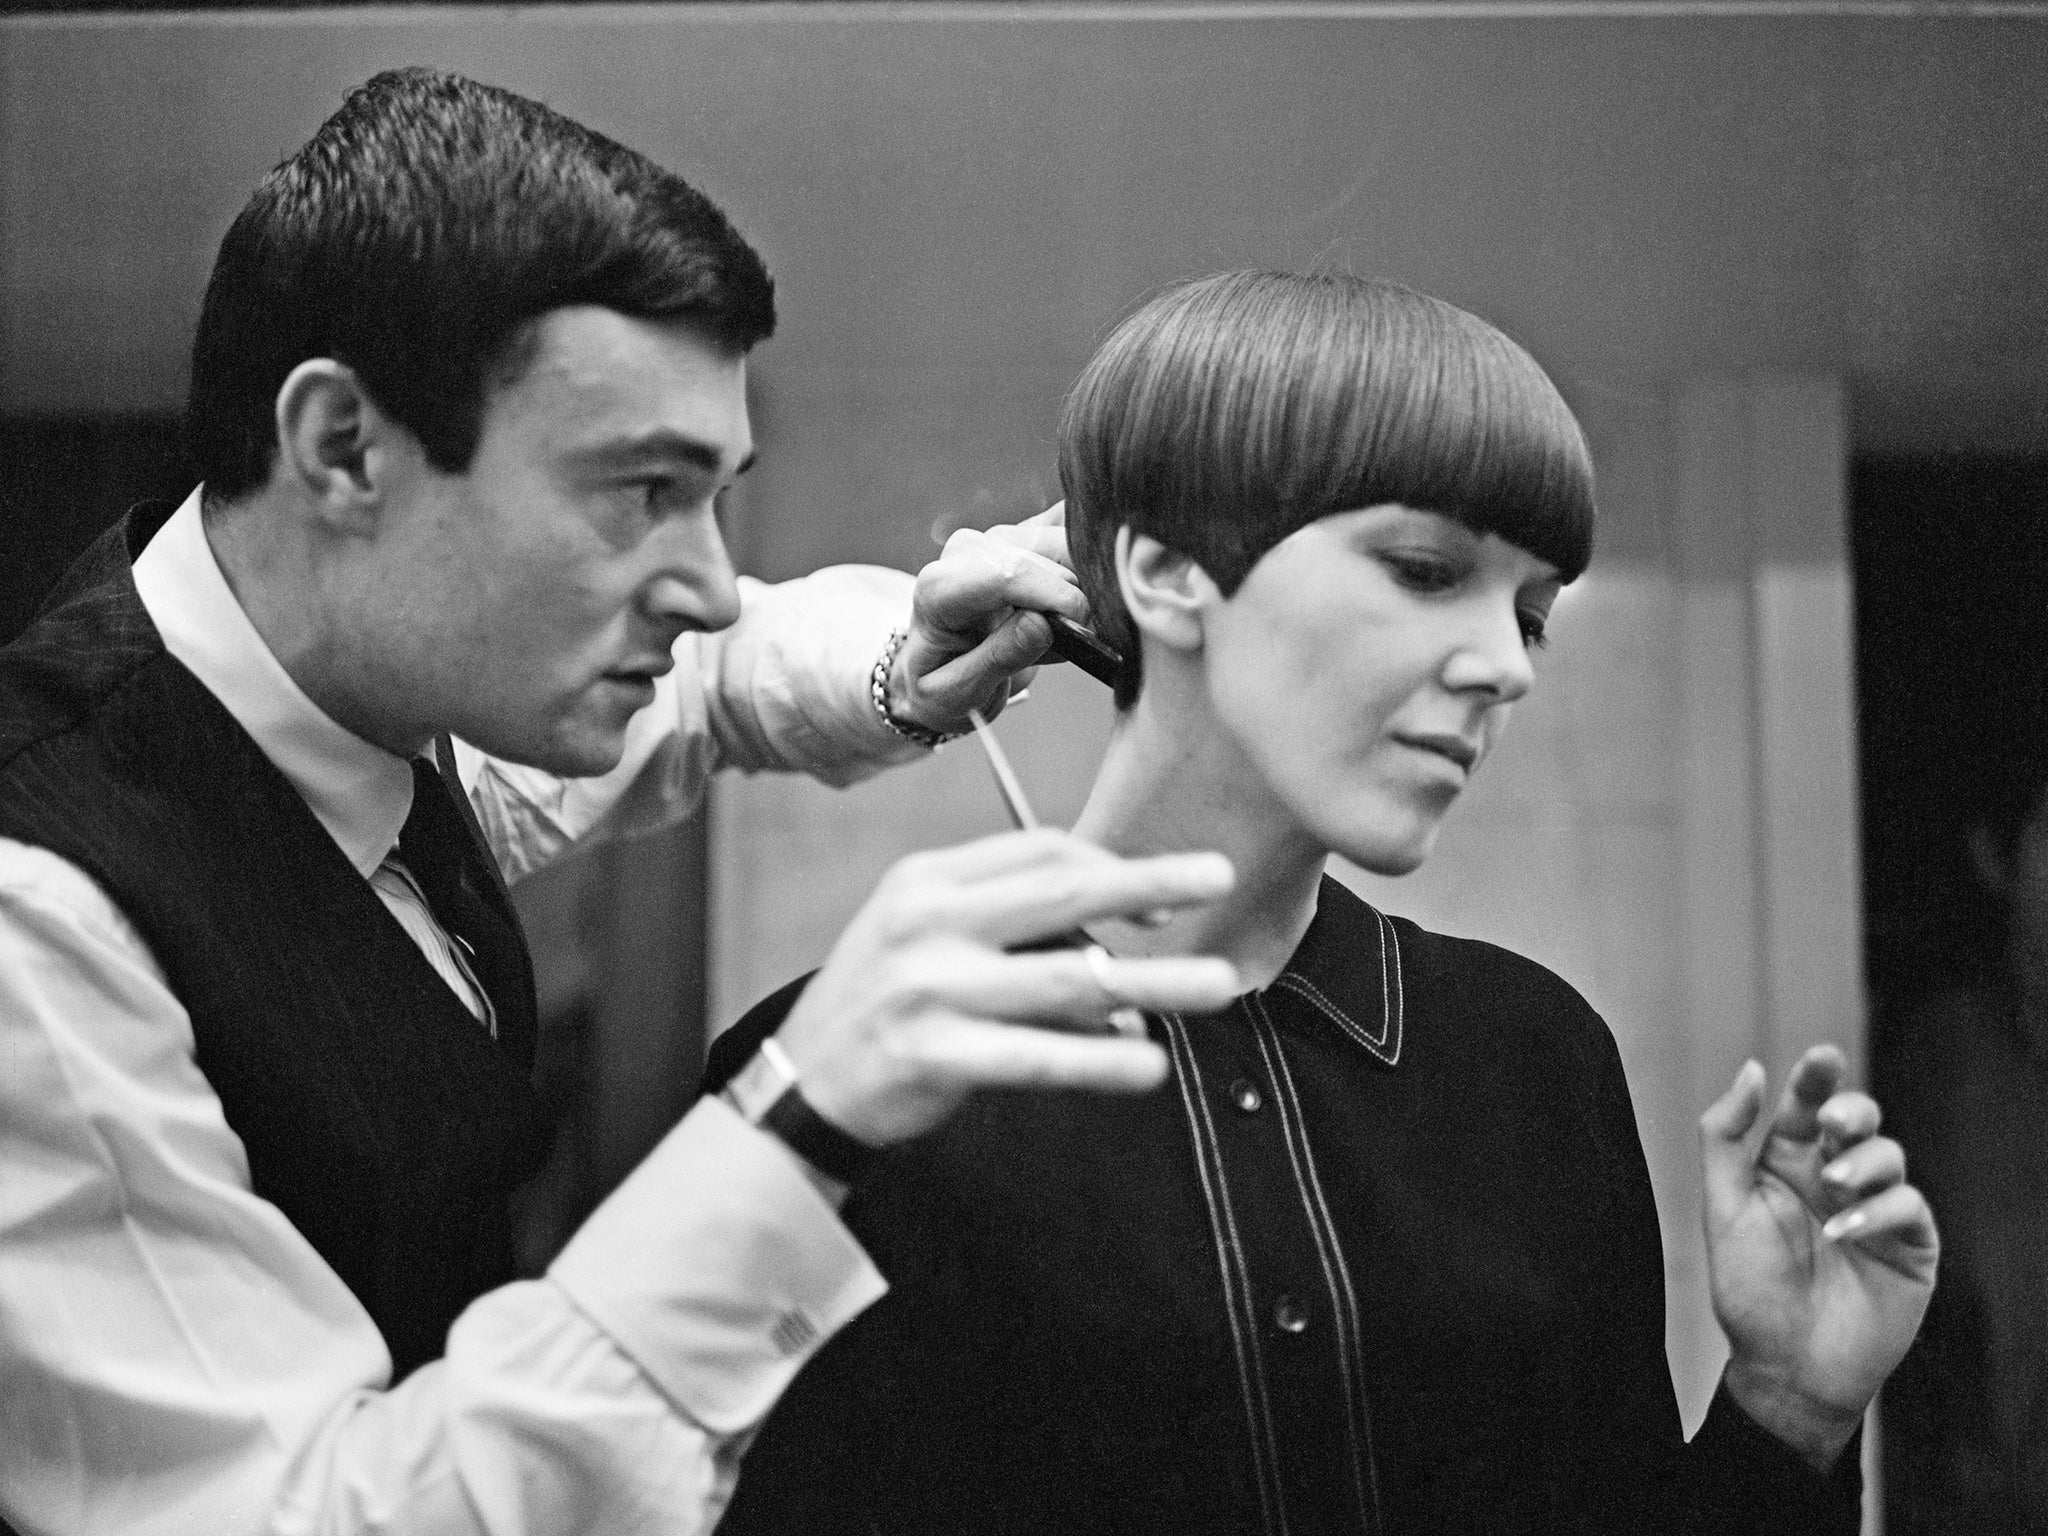 Quant gets her iconic locks cut by hairdressing legend Vidal Sassoon